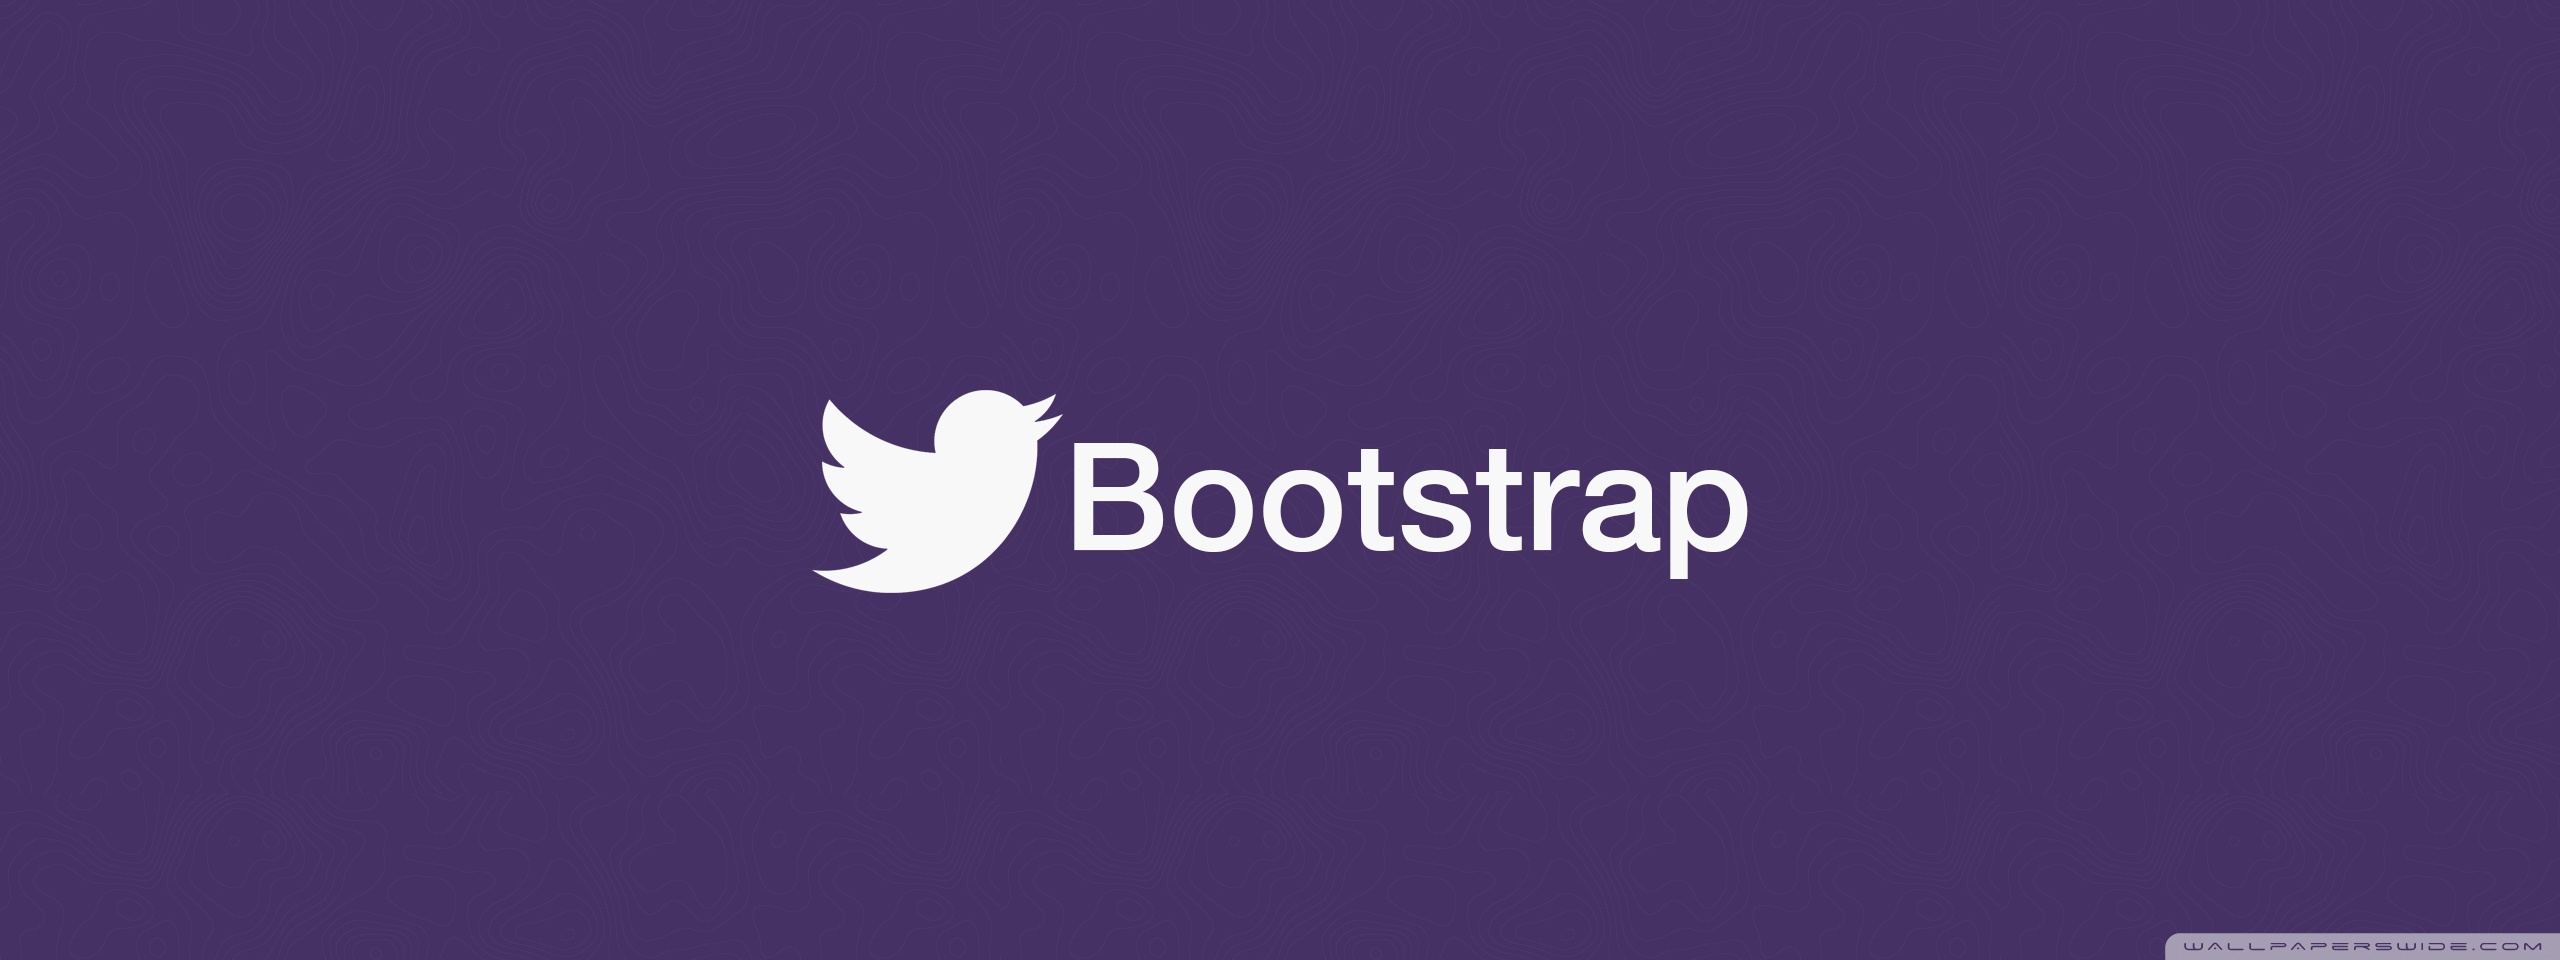 Bootstrap. Картинка Bootstrap. Bootstrap 3. Иконка Bootstrap. Bootstrap org